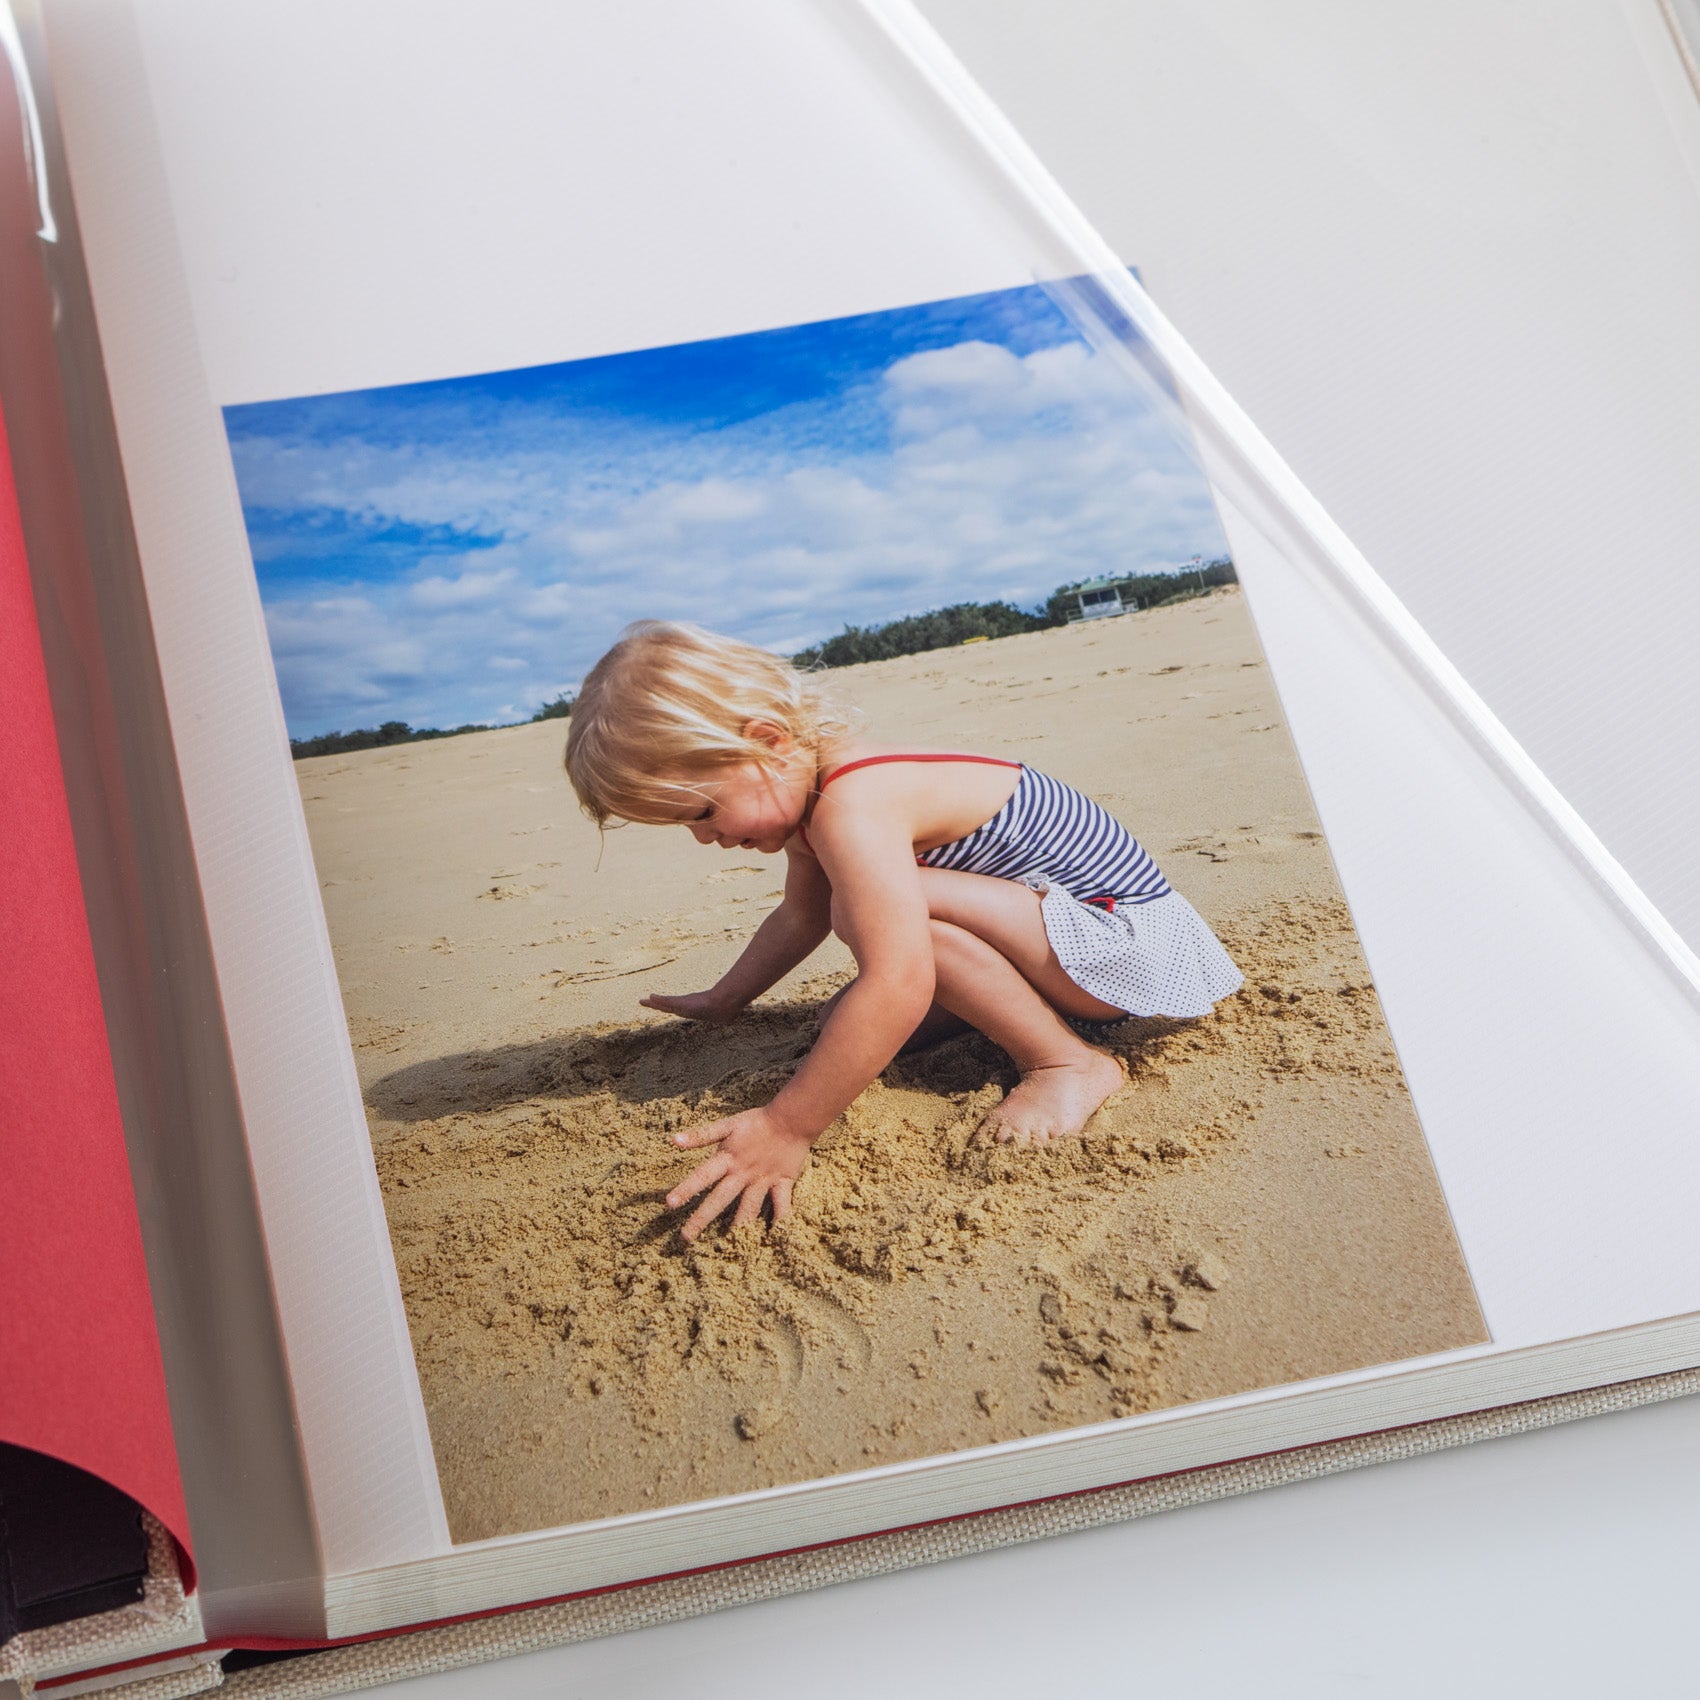 Personalised Self Adhesive Photo Albums - Use out Creative